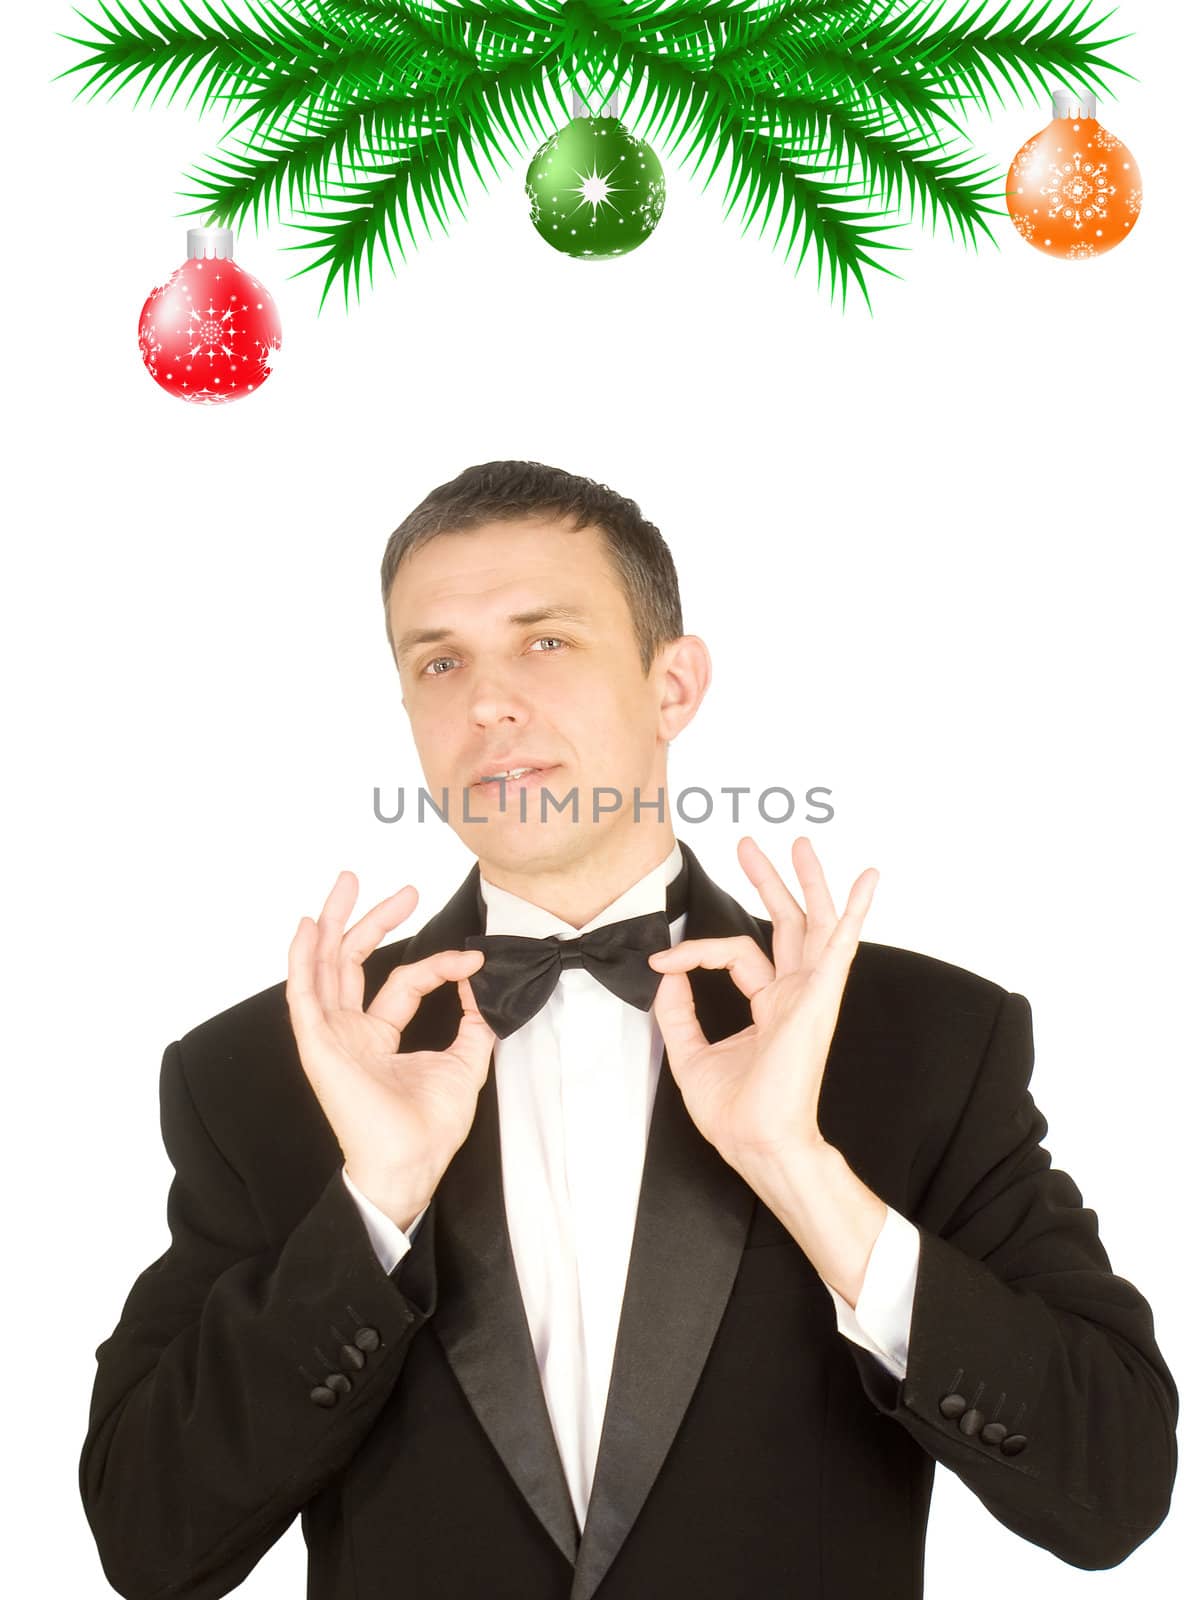 The happy man in a classical tuxedo in an anticipation of New Year's holidays